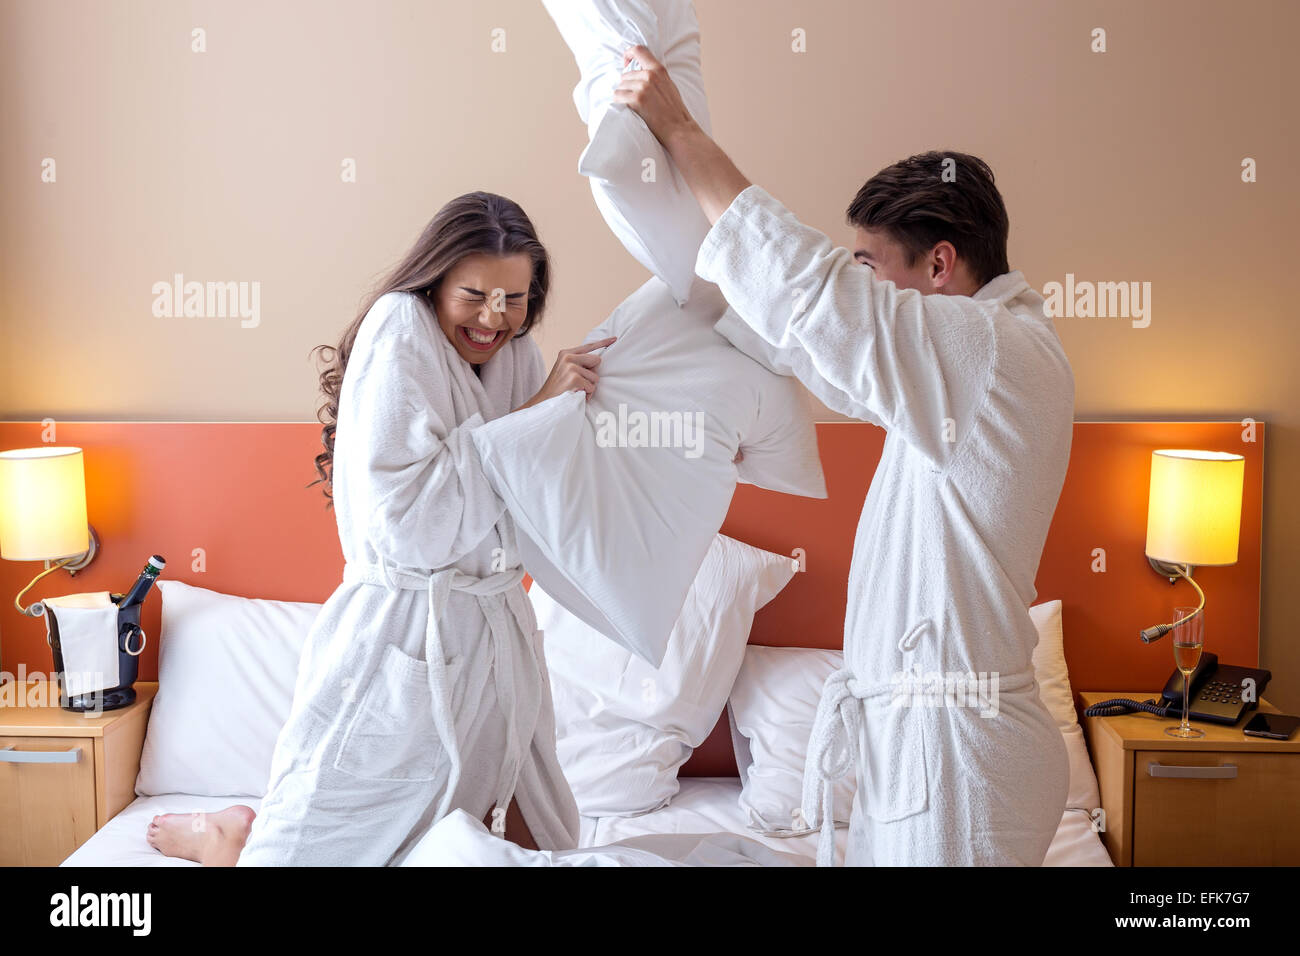 Happy Couple Having Pillow Fight in Hotel Room Stock Photo